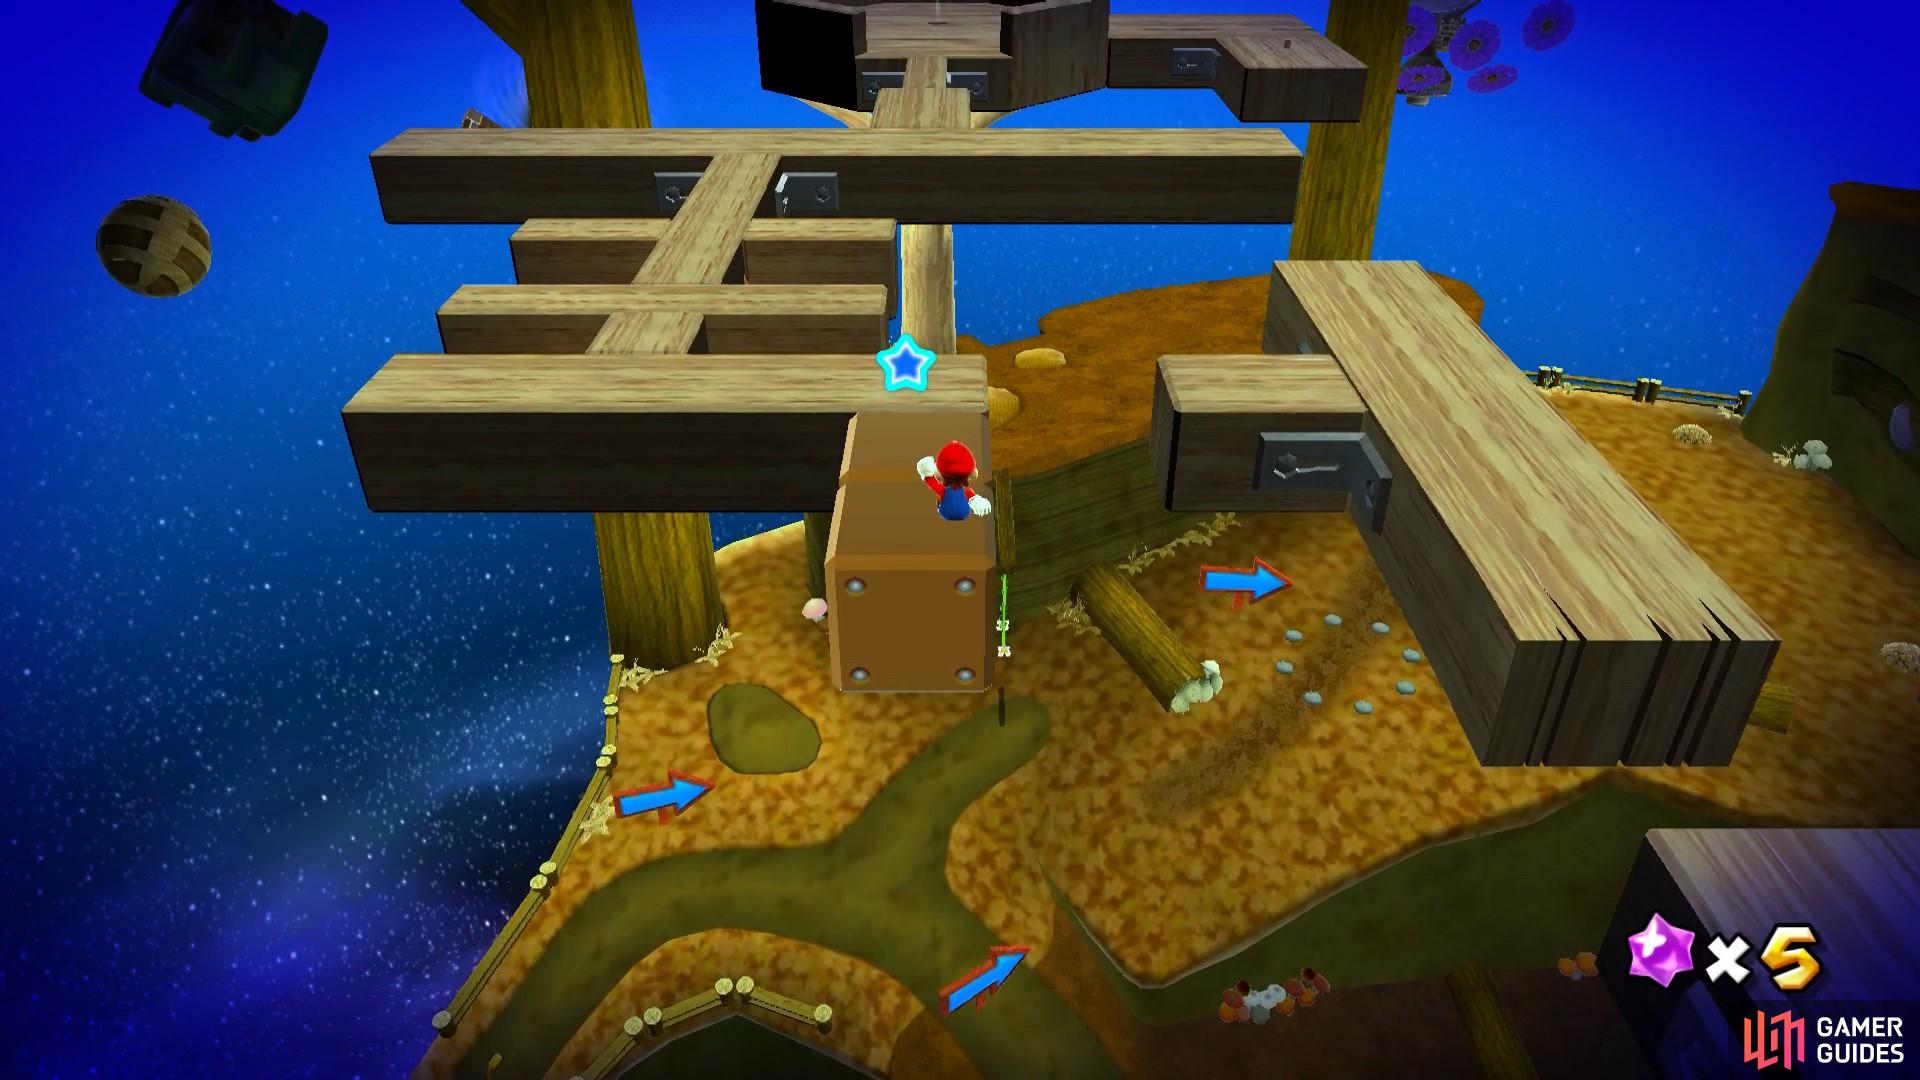 You'll need to use some shortcuts to get ahead of Cosmic Mario.